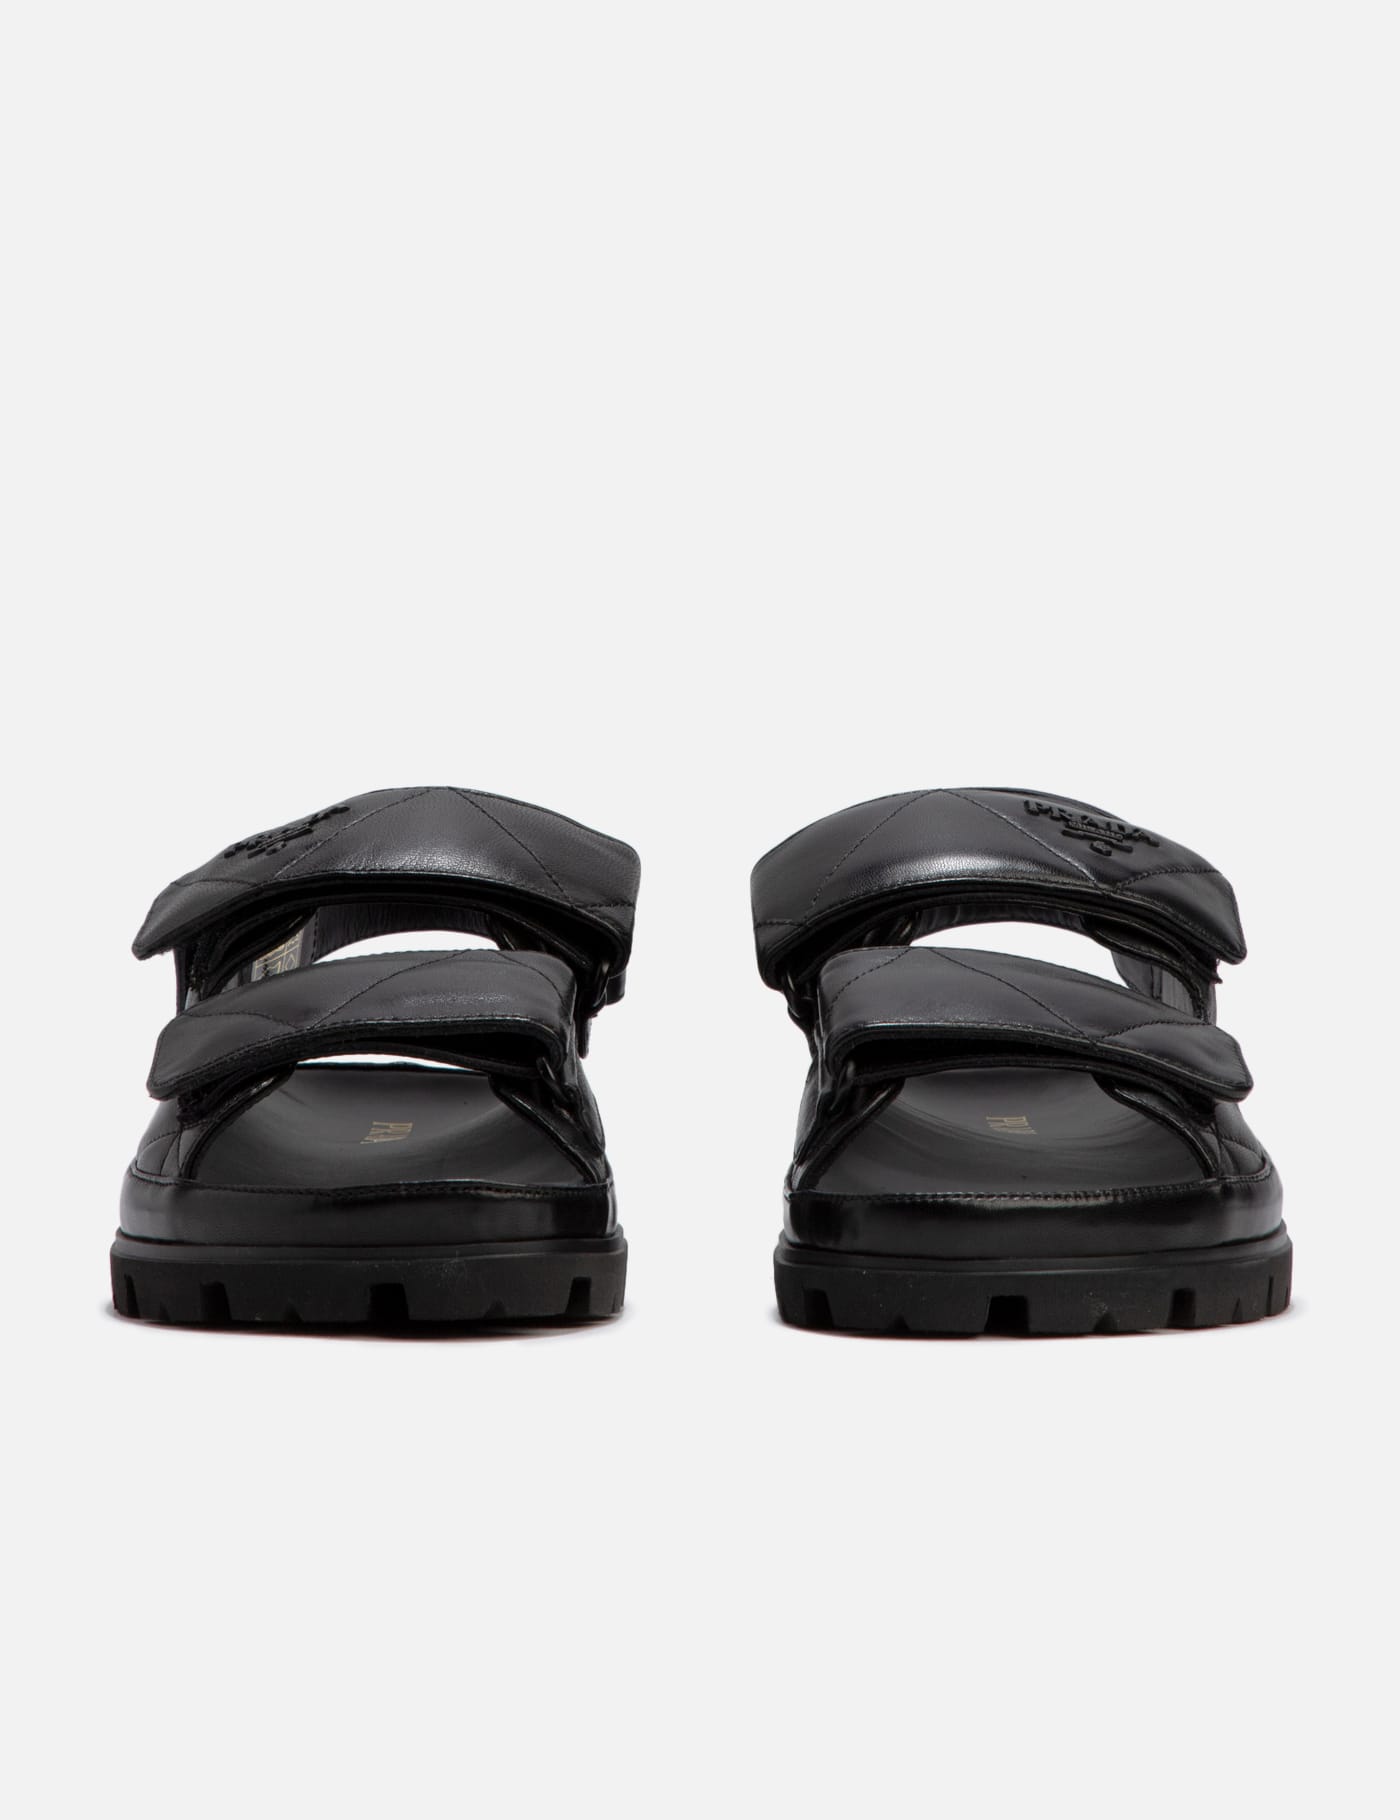 Prada Pre-Owned Silver leather cross-strap sandals | SOTT